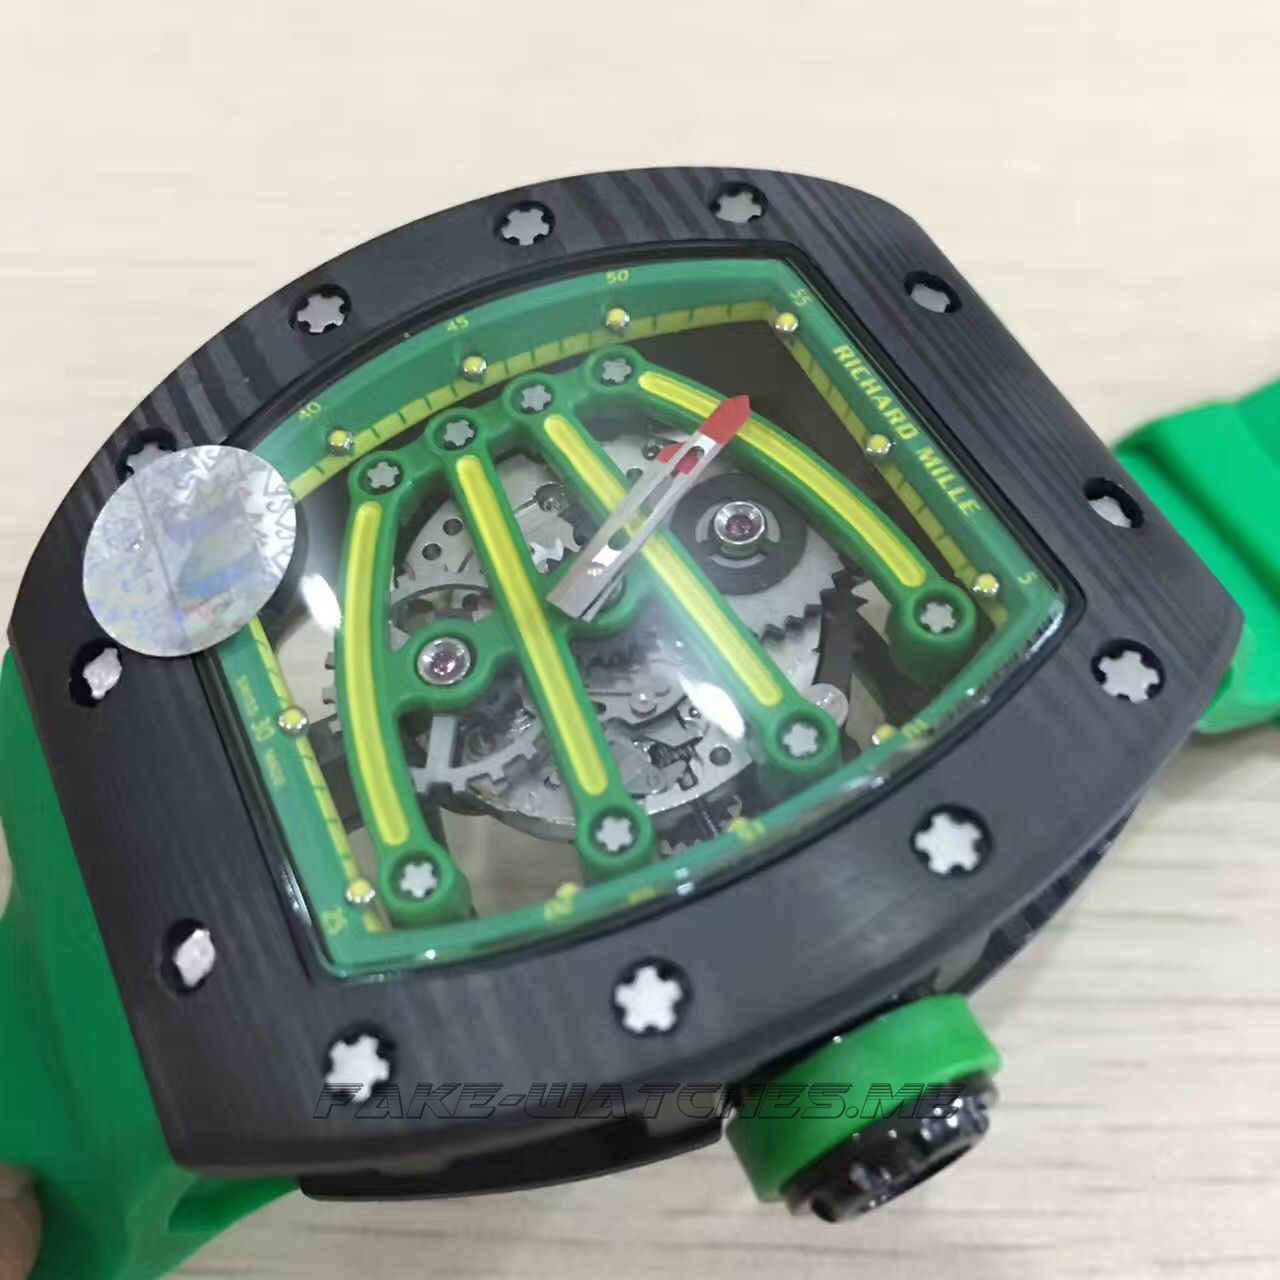 Richard Mille RM59-01A Forged Carbon Green Skeleton Dial